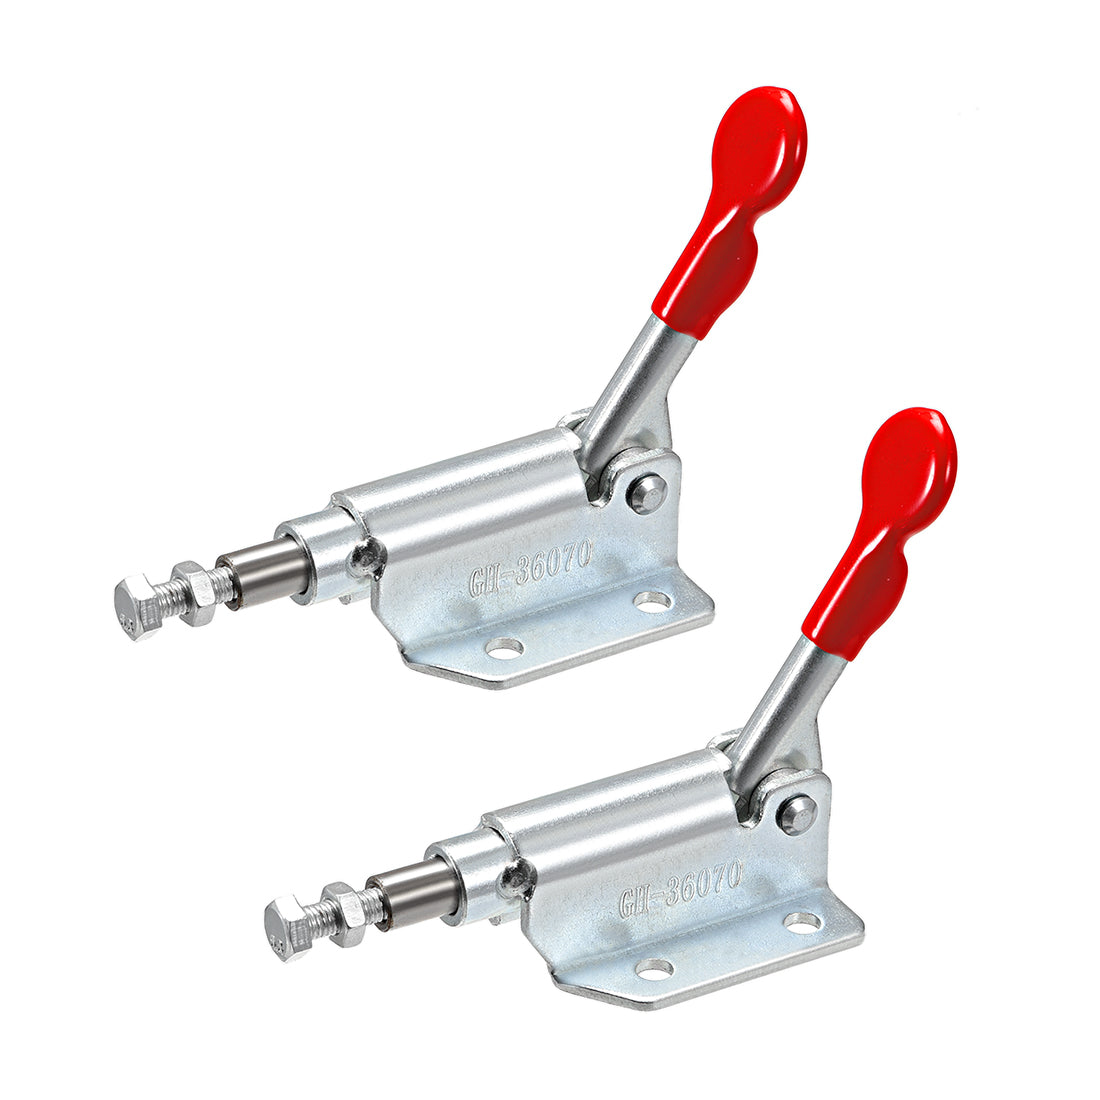 uxcell Uxcell 2 Pcs Hand Tool Pull Push Action Toggle Clamp Quick Release Clamp 130 lbs/60kg Holding Capacity 10mm Stroke